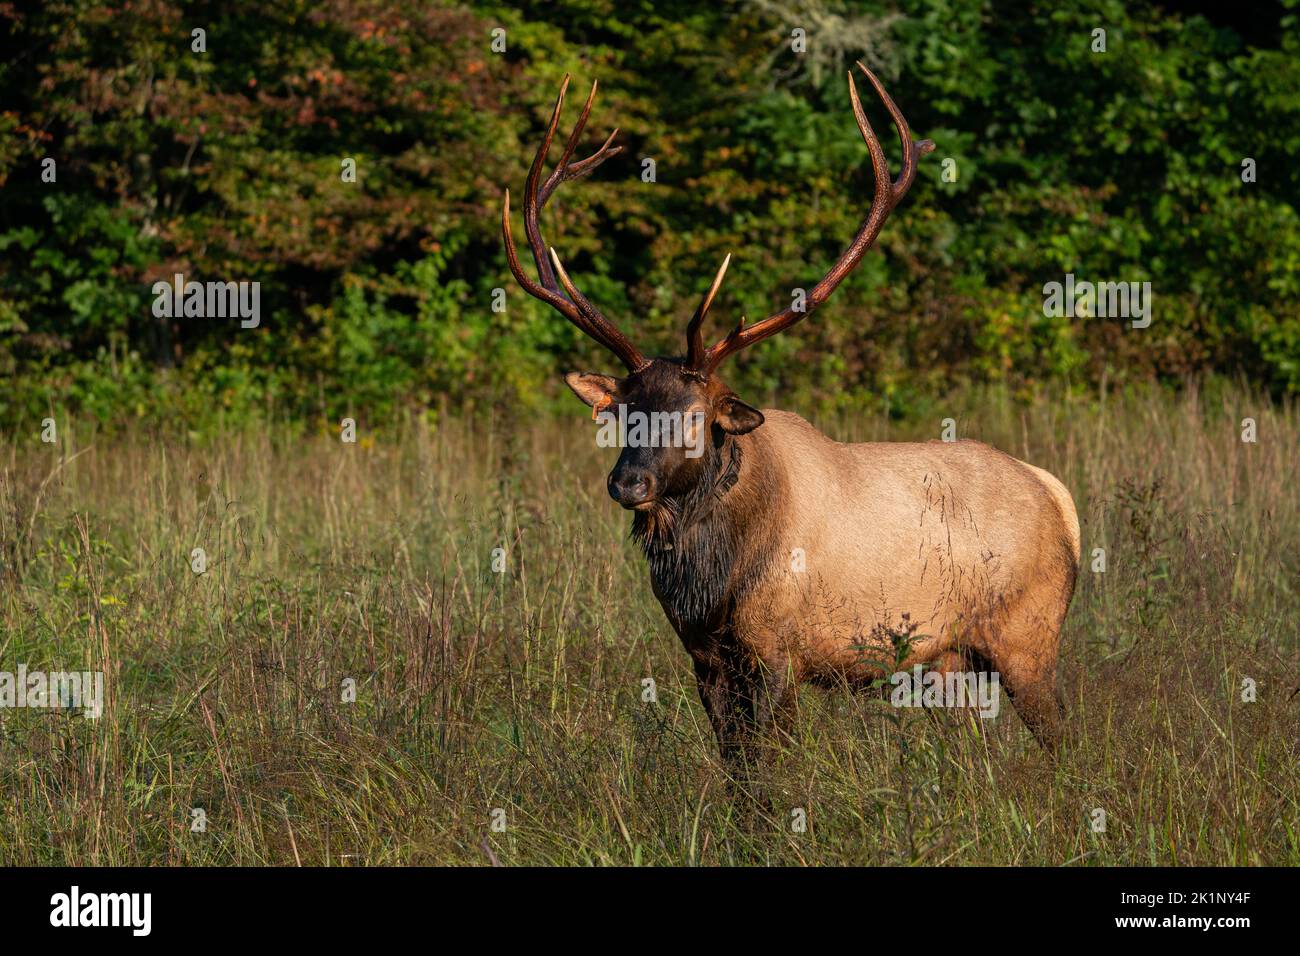 A rocky mountain elk in a strong stance. Stock Photo